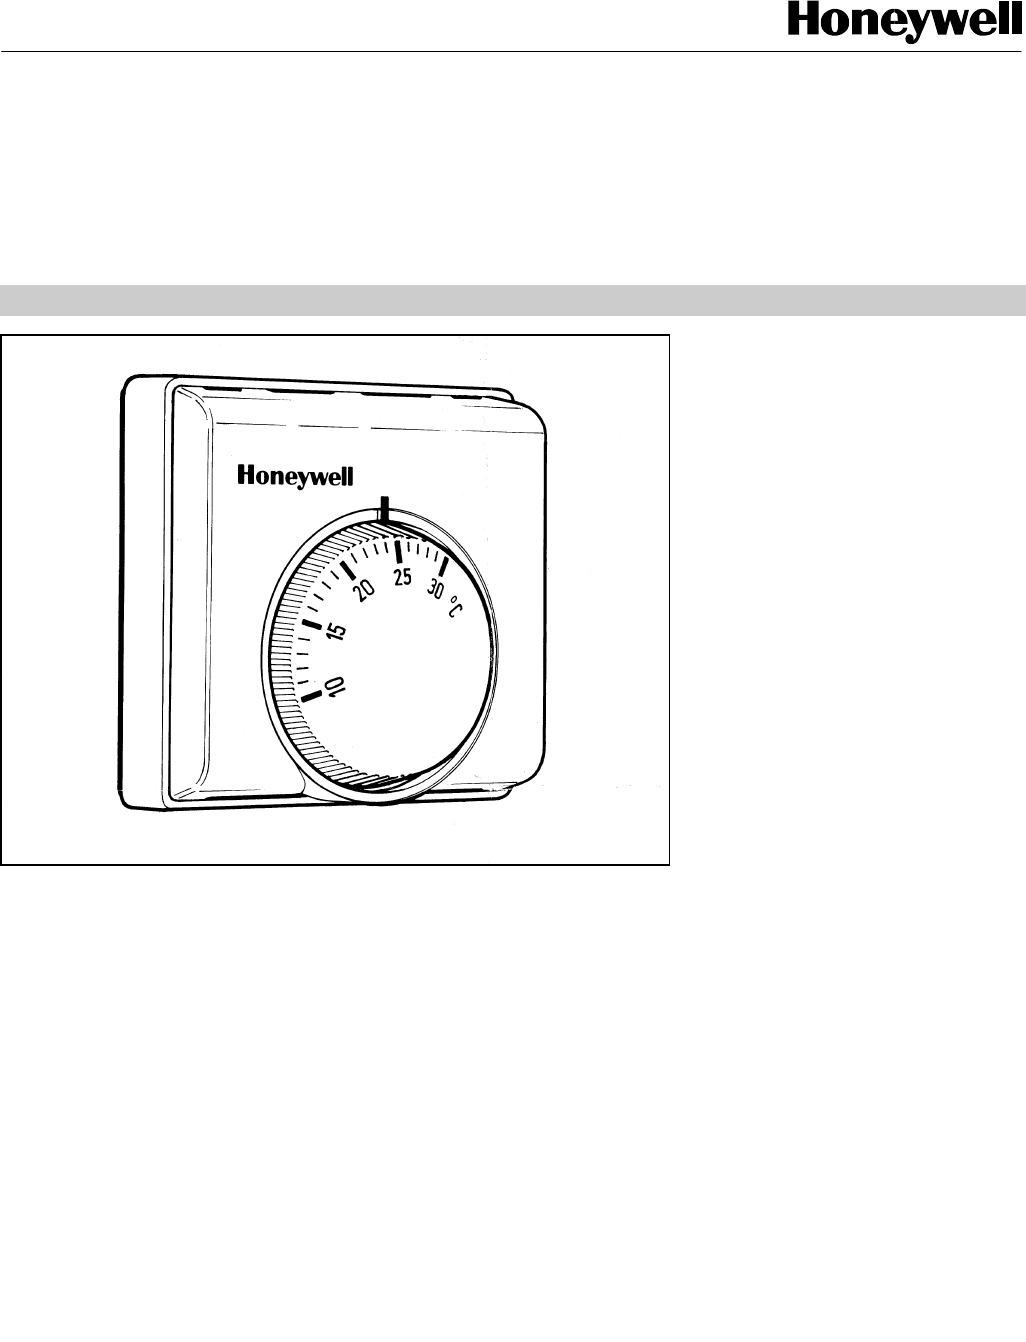 Manual Honeywell T4360 (page 1 of 4) (English)